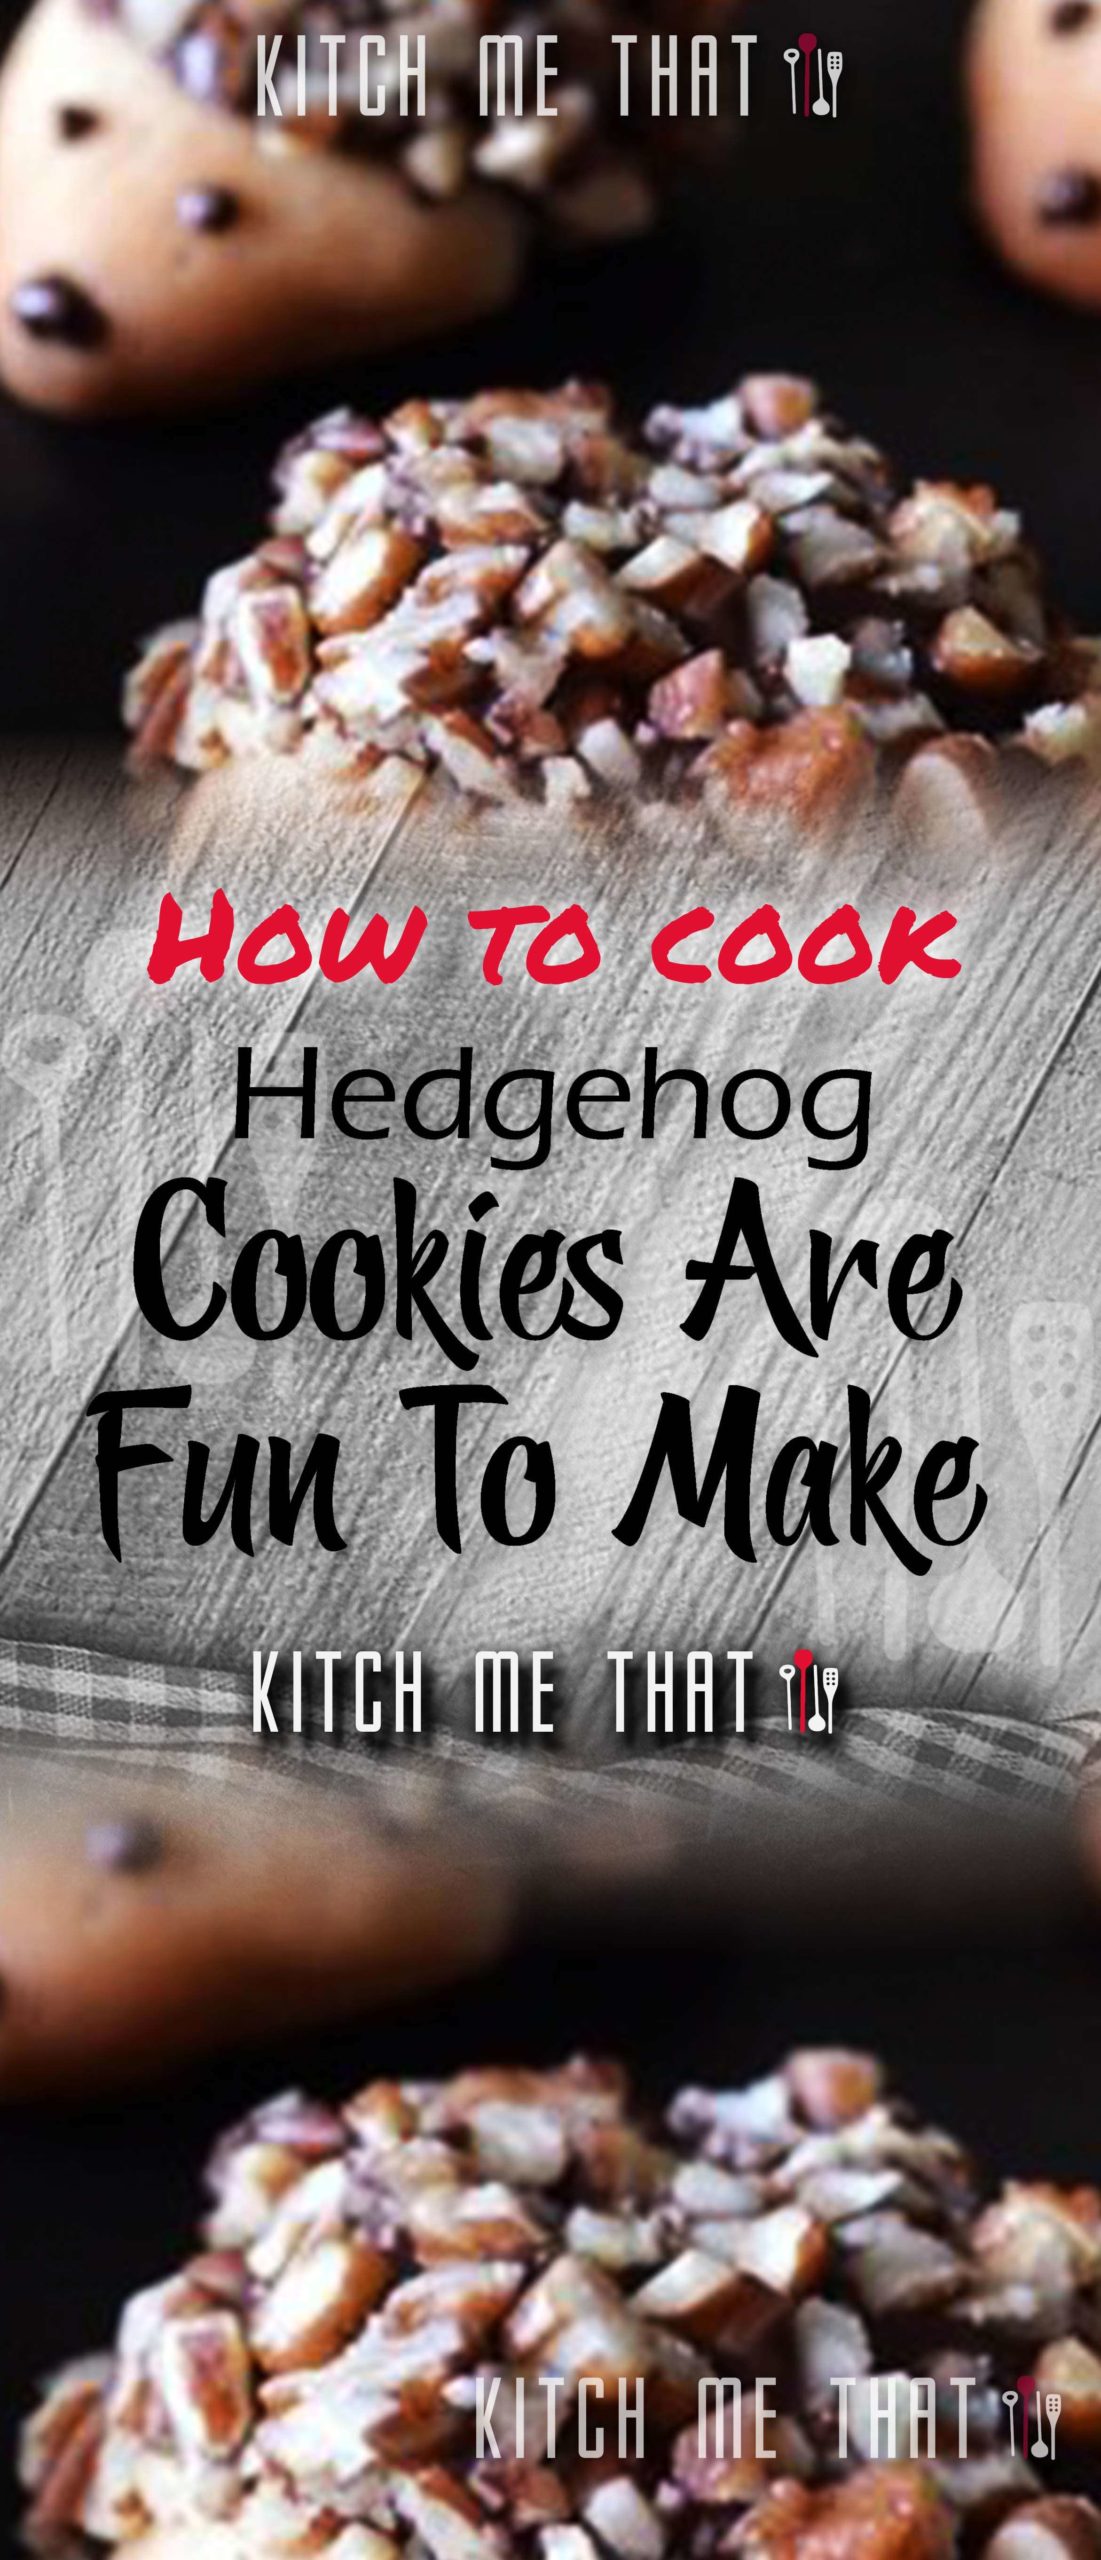 Hedgehog Cookies Are Fun To Make (And Eat)